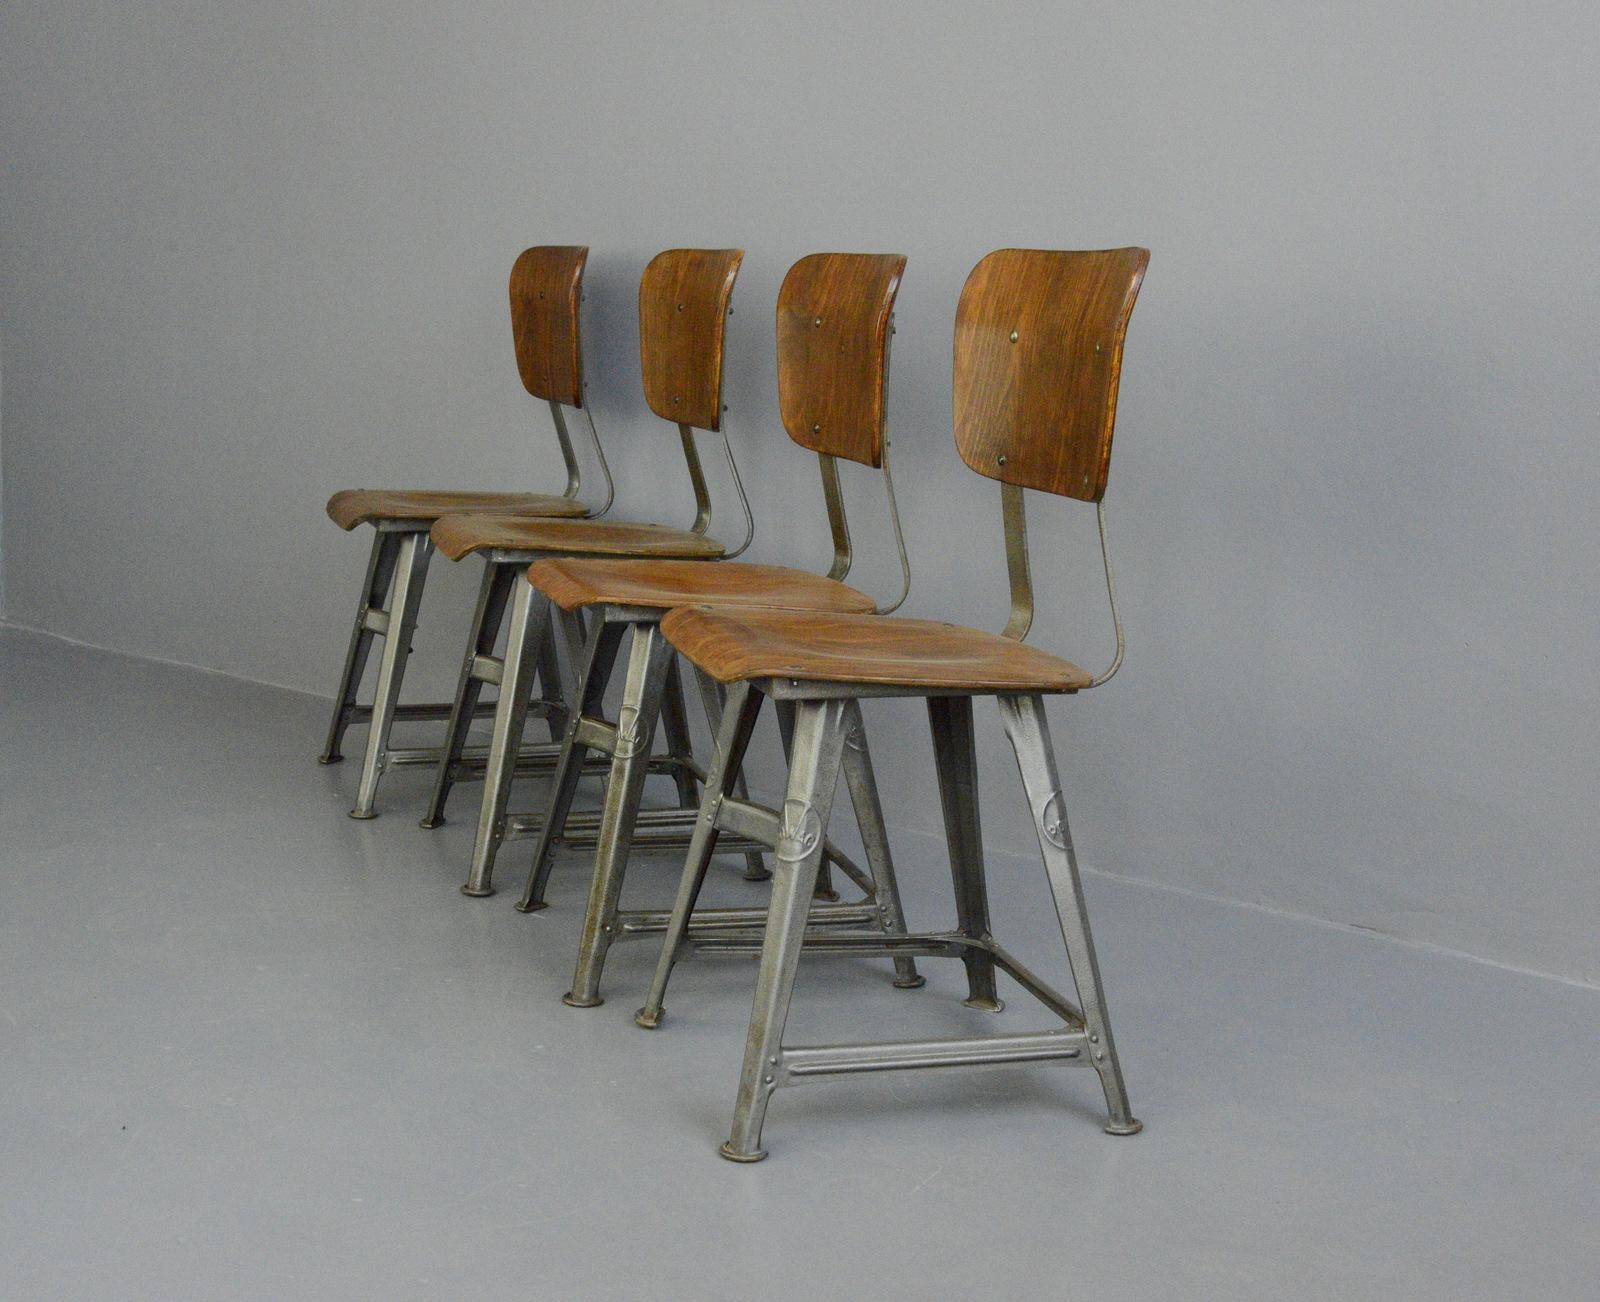 Steel Industrial Factory Chairs by Rowac, circa 1920s